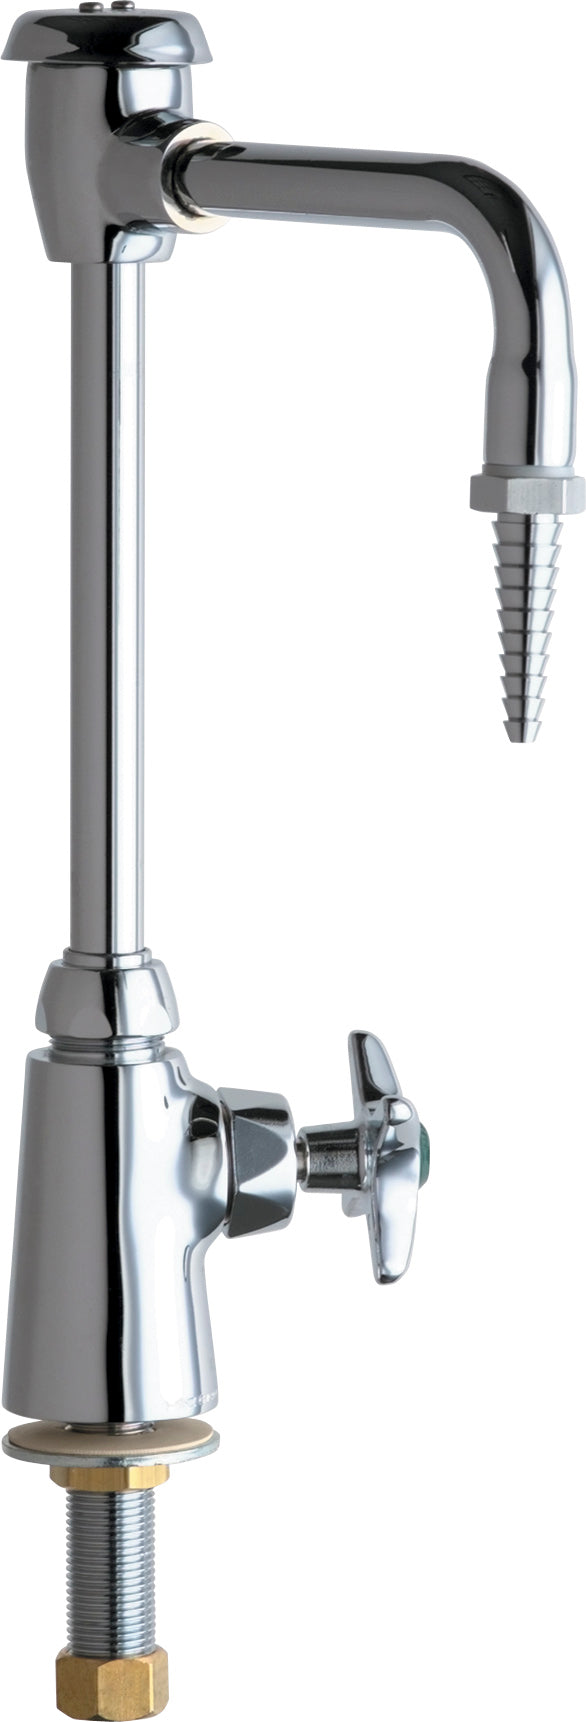 Chicago Faucets Laboratory Sink Faucet 928-CP